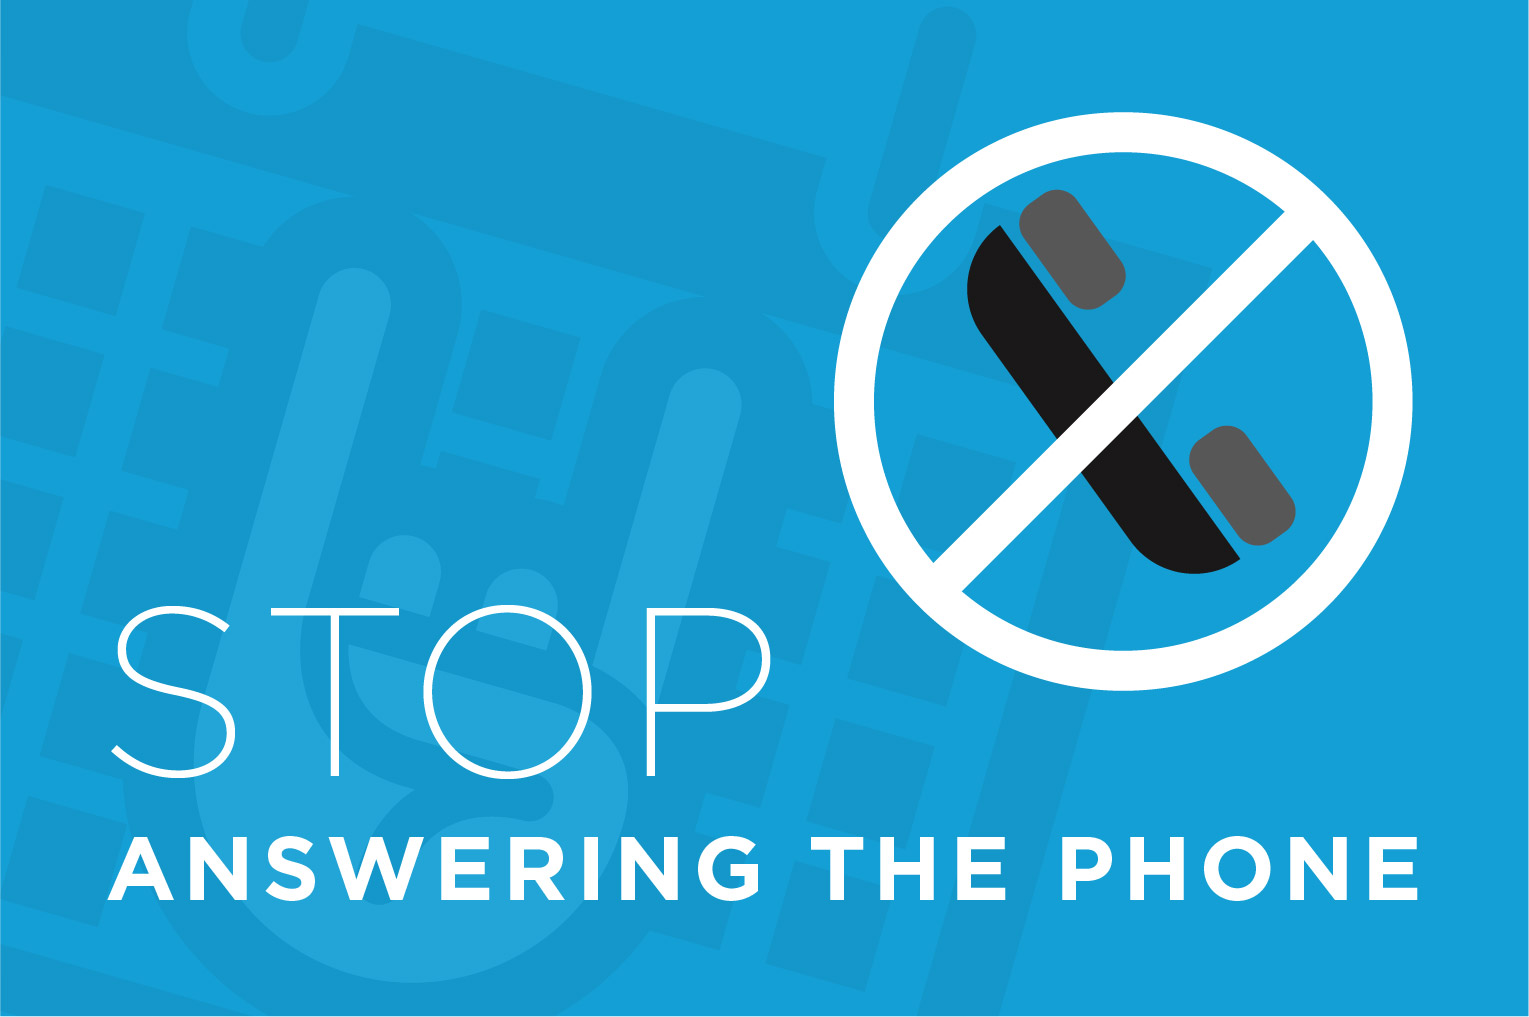 Productivity Advice: Increase Productivity by not answering the phone